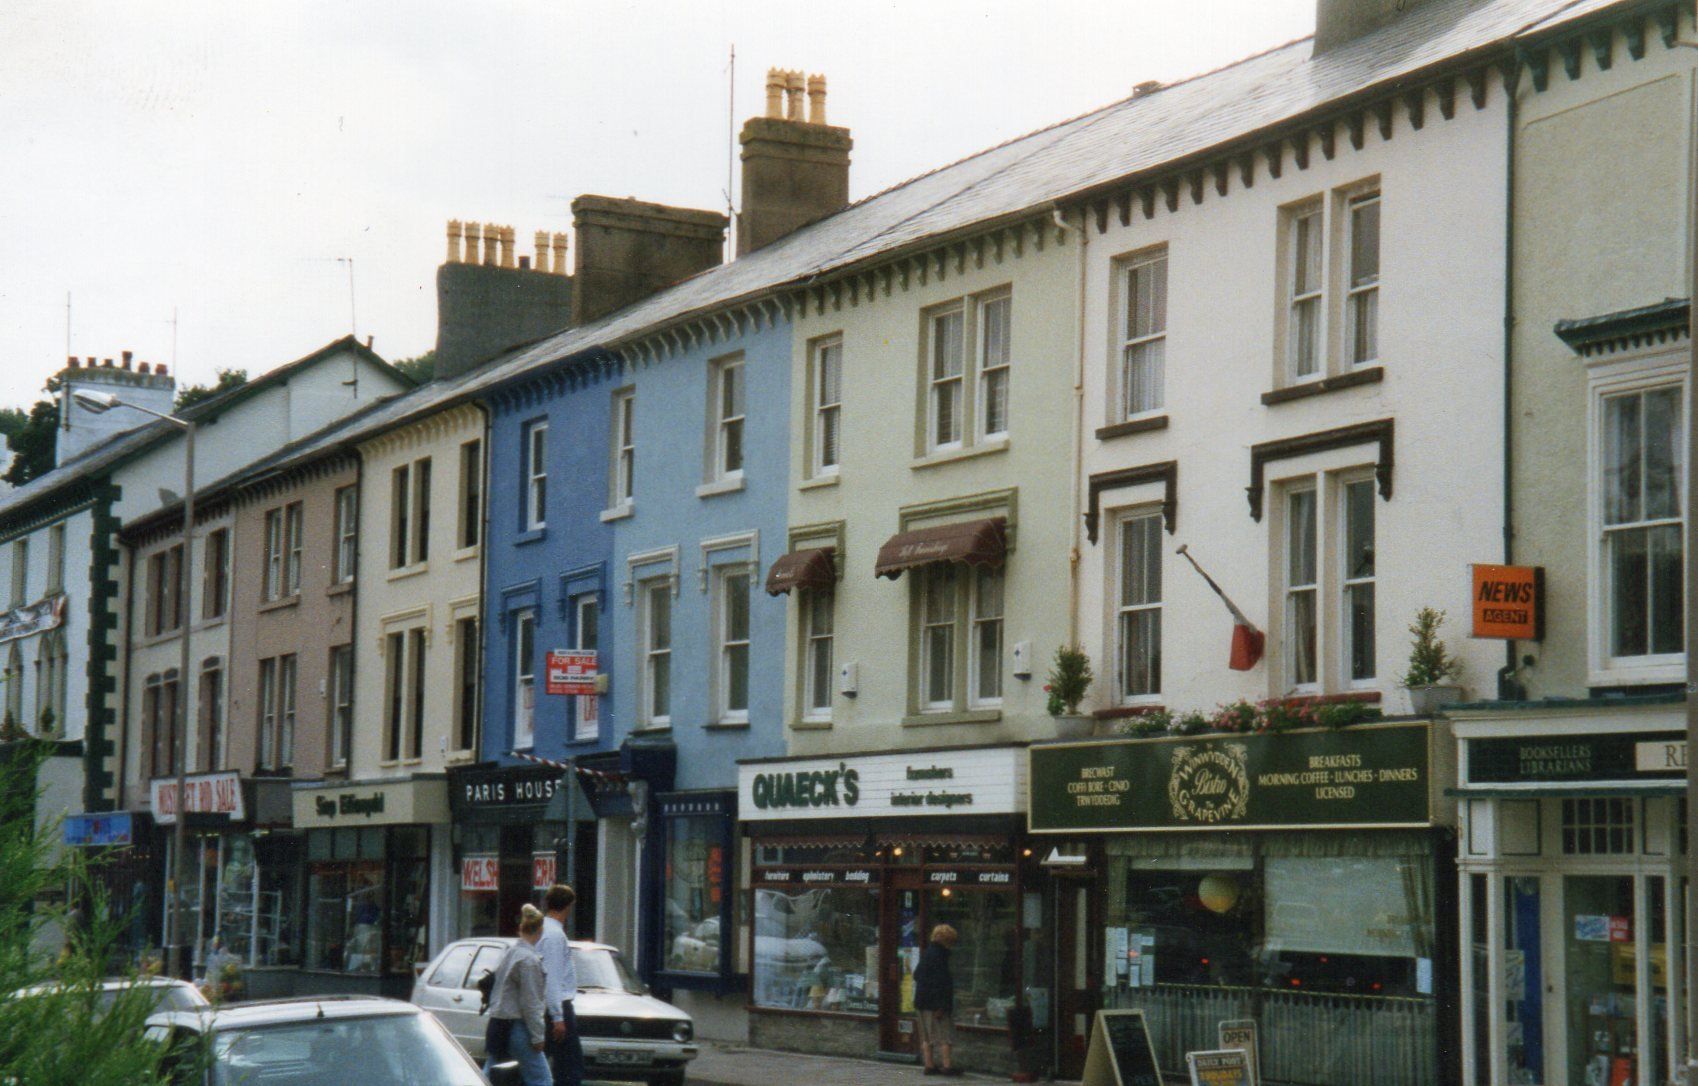 150 High Street as seen from 133 High Street during the 1990s